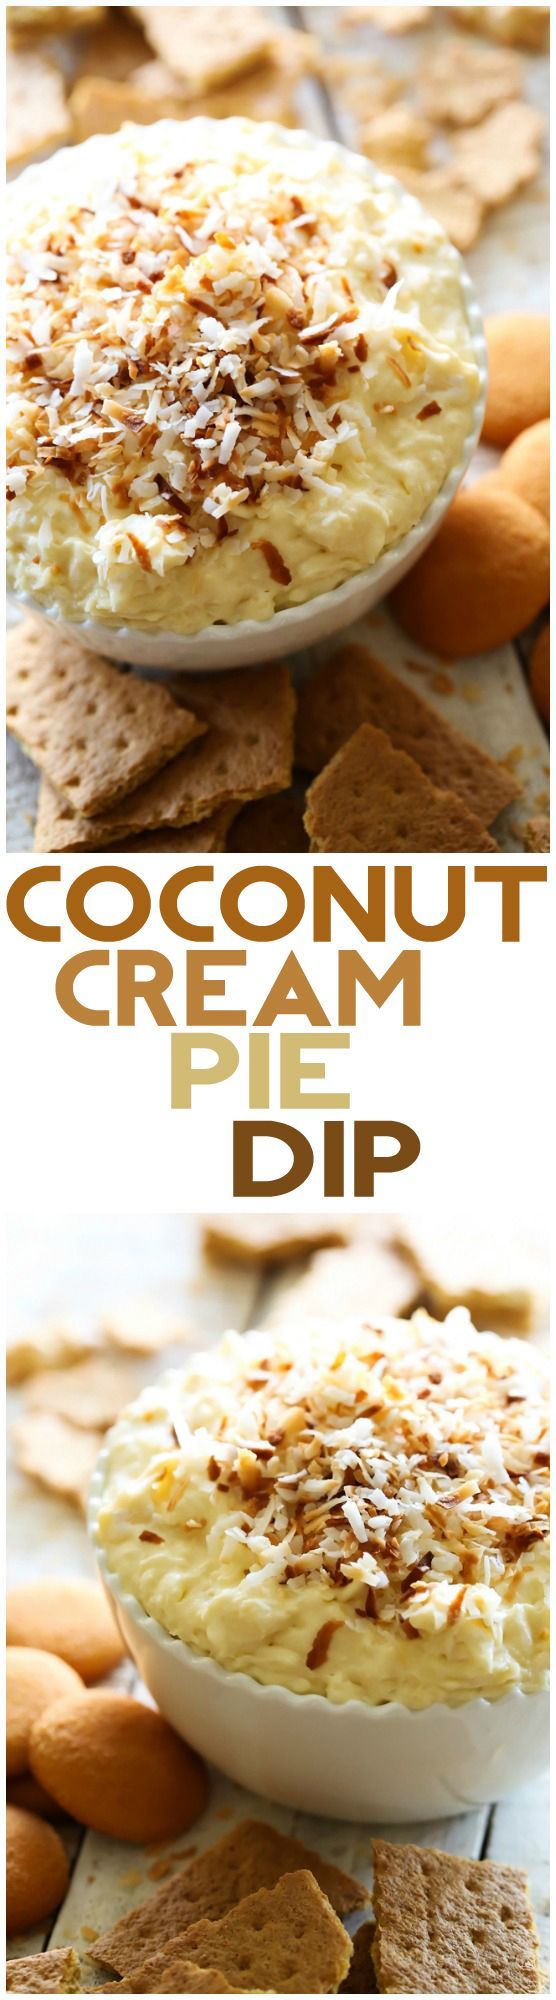 This Coconut Cream Pie Dip is seriously INCREDIBLE! The most delicious coconut cream pie transformed into